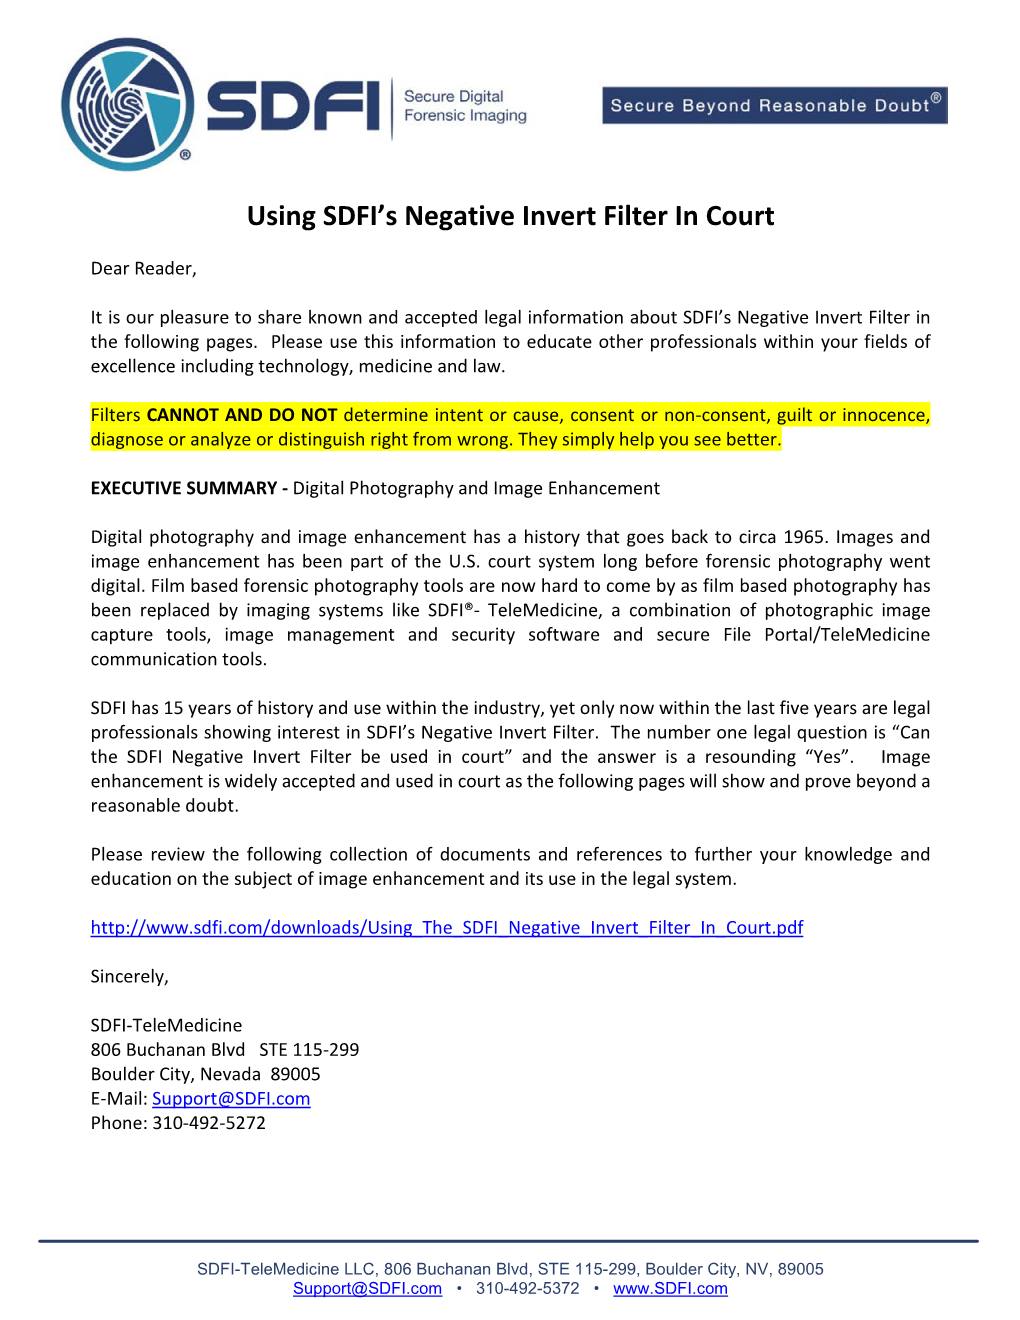 Using the SDFI Negative Invert Filter in Court